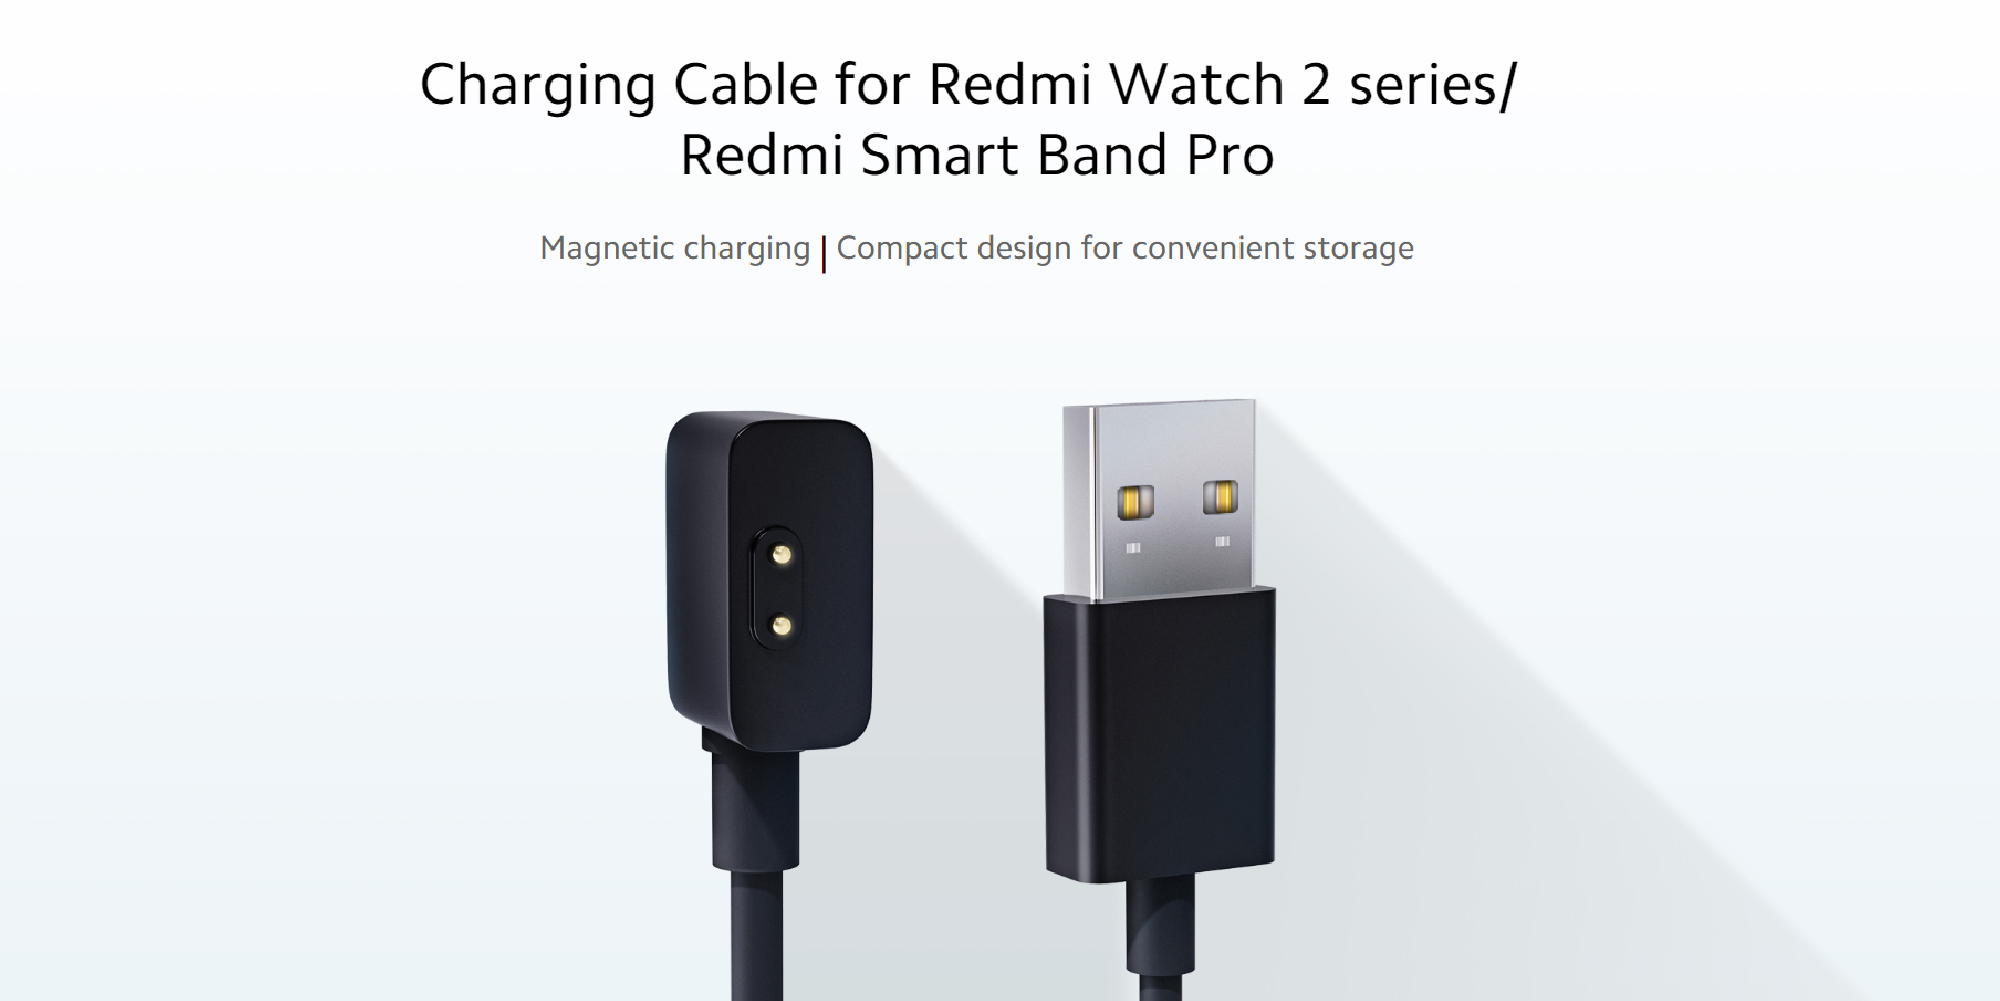 Charging Cable for Redmi Watch 2 series